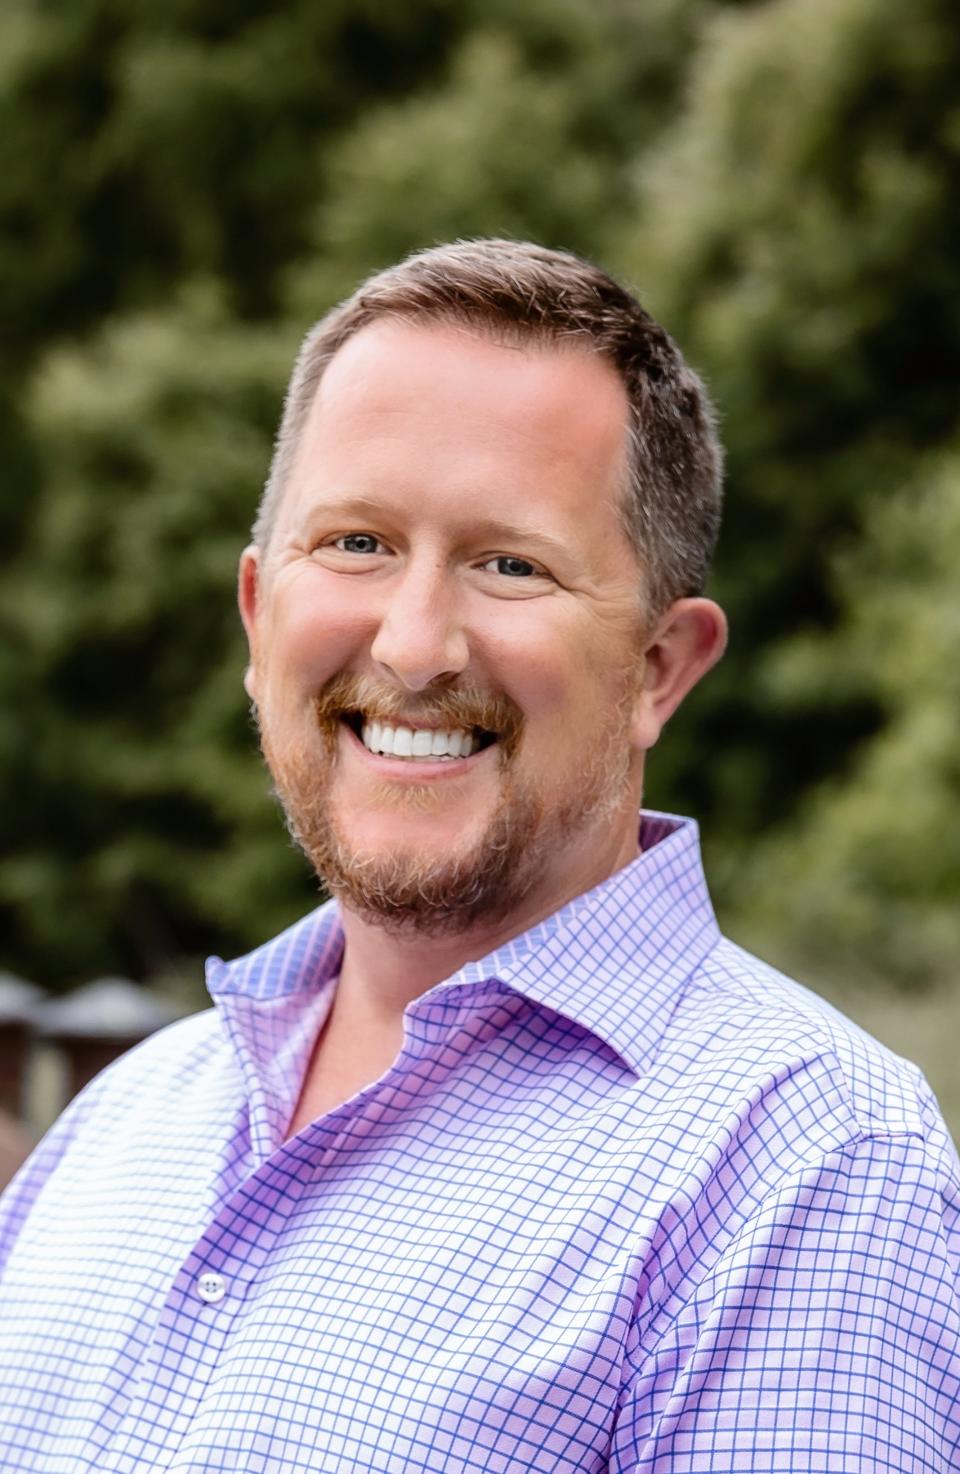 Ed Coambs is a financial therapist based in Charlotte, North Carolina. He is also past president of the Financial Therapy Association and has written a book and hosts a podcast about love and money.